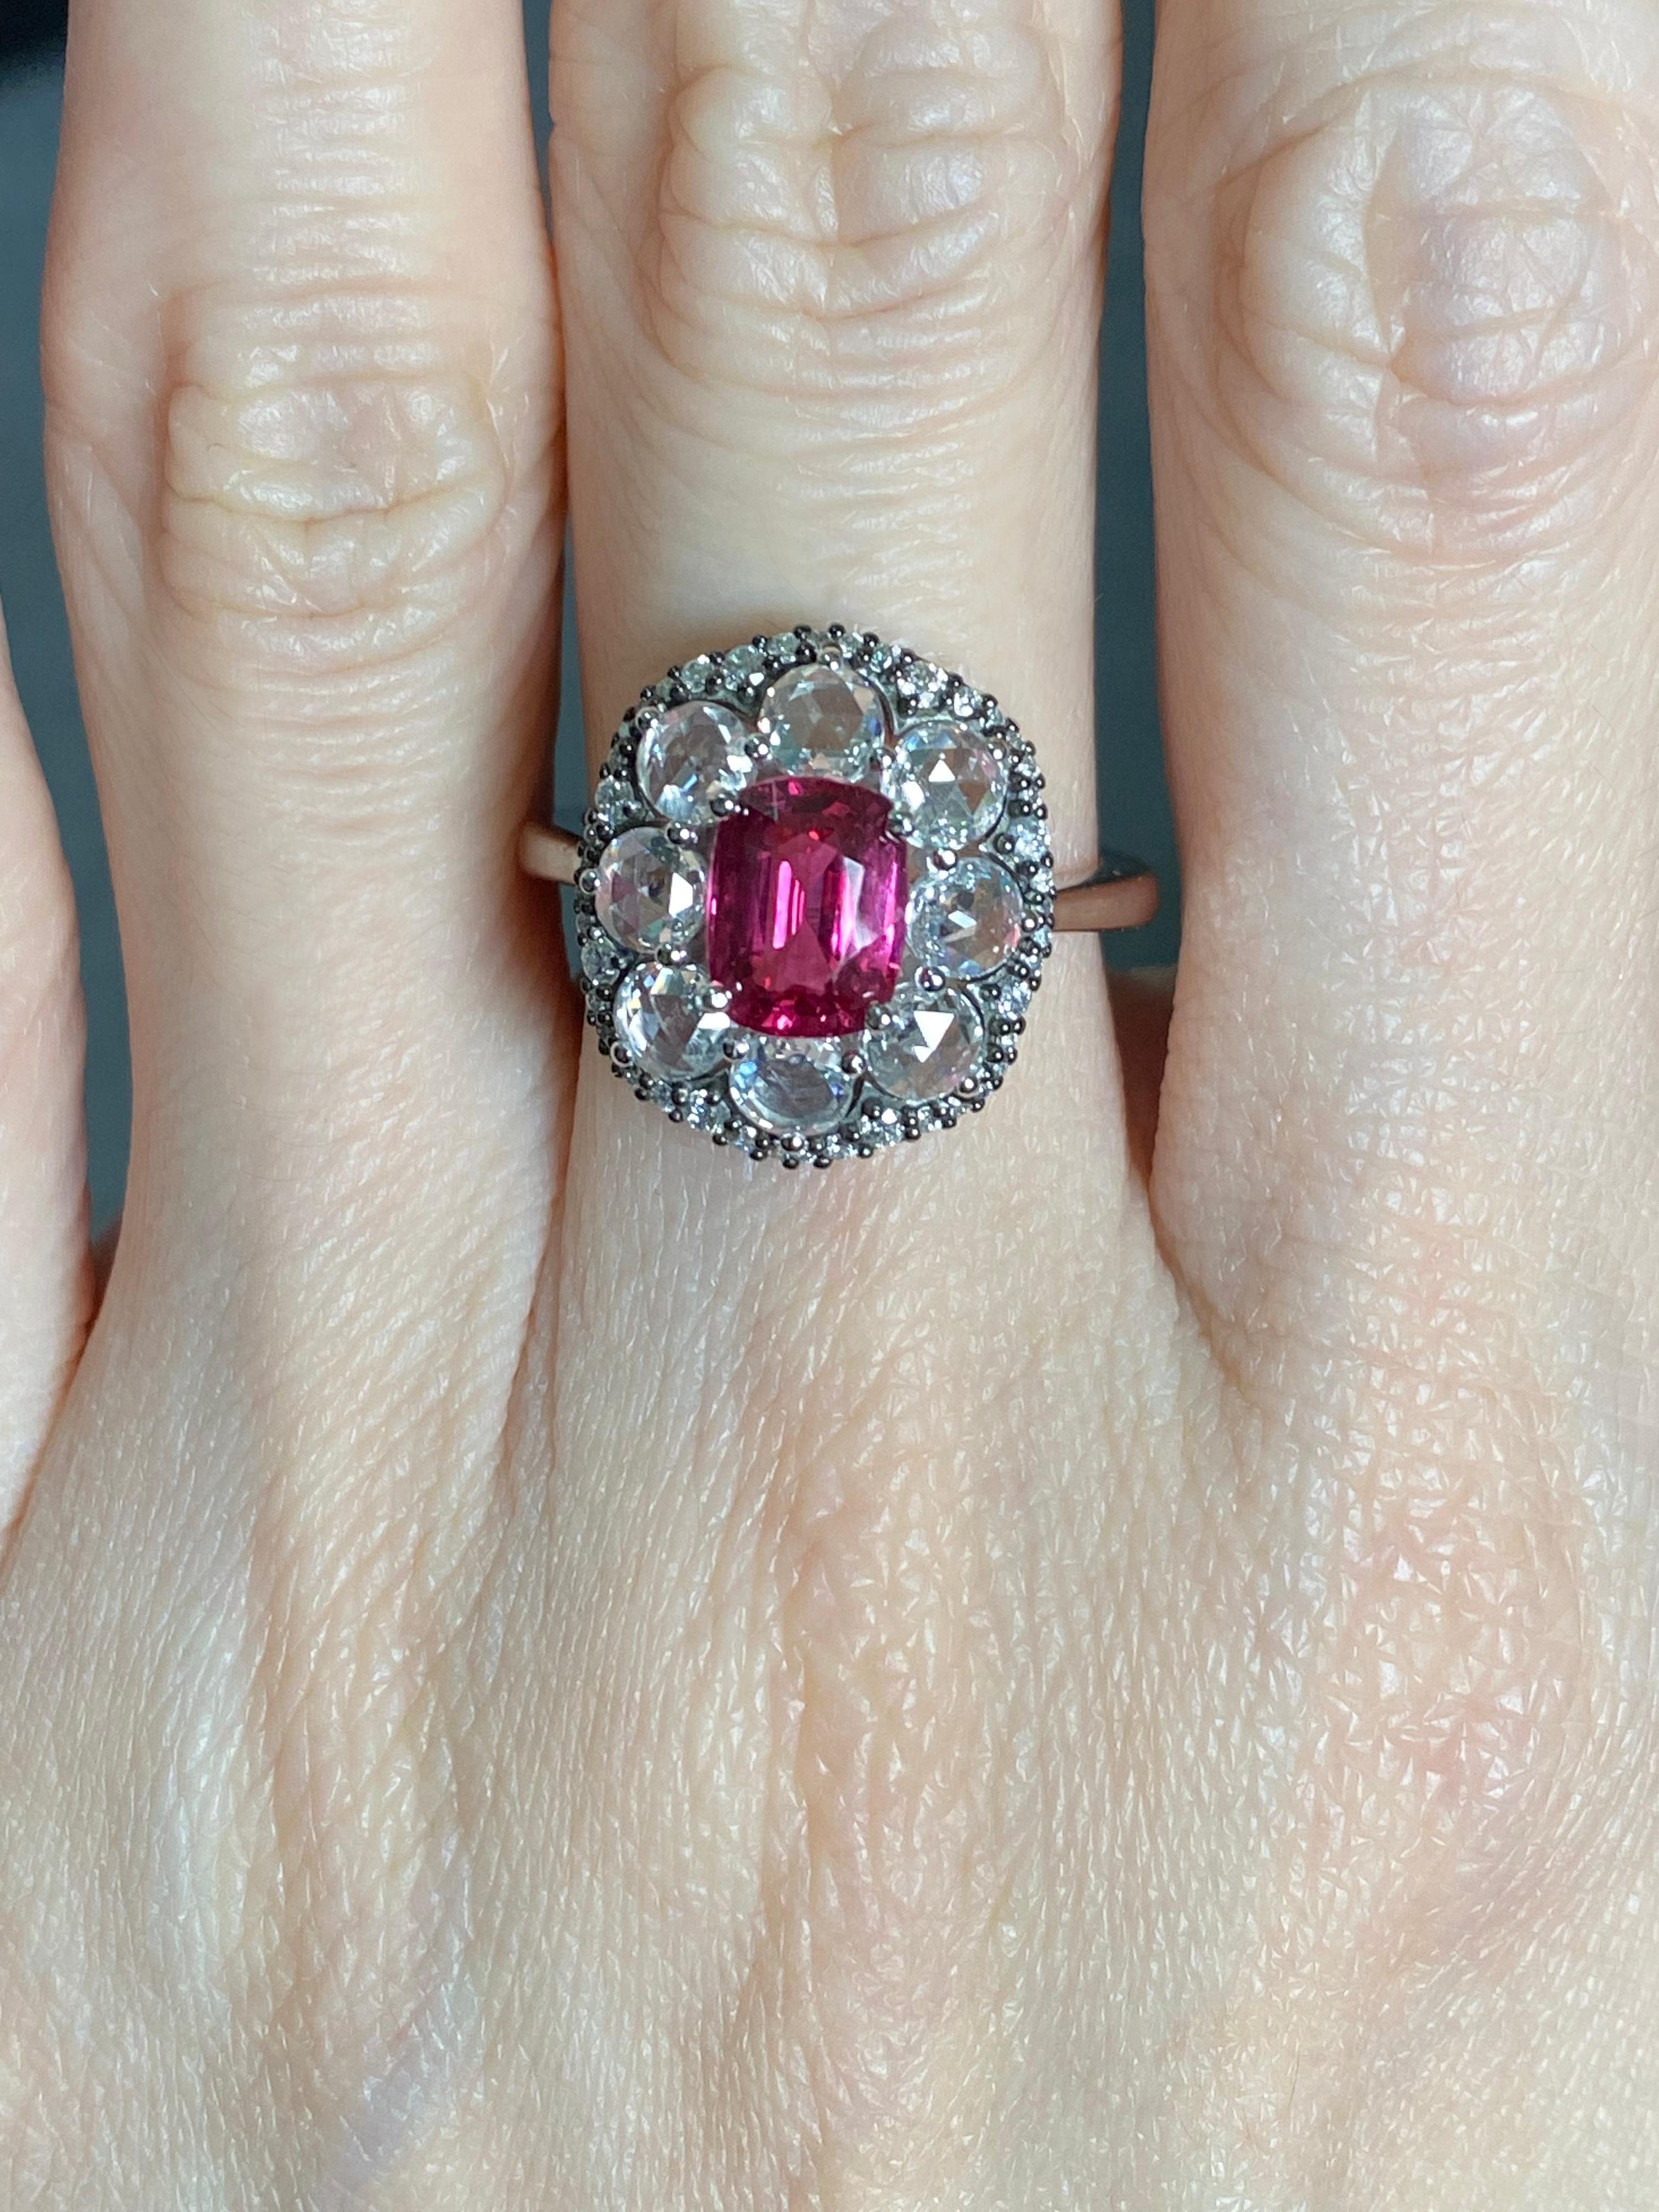 A stunning art-deco, vintage looking 1.53 carat natural Pink Spinel cushion shaped center stone, with 1.10 carat rose cut White Diamonds and 0.29 carat Diamonds set in solid 18K White Gold and black rhodium polish. Spinels has been frequently